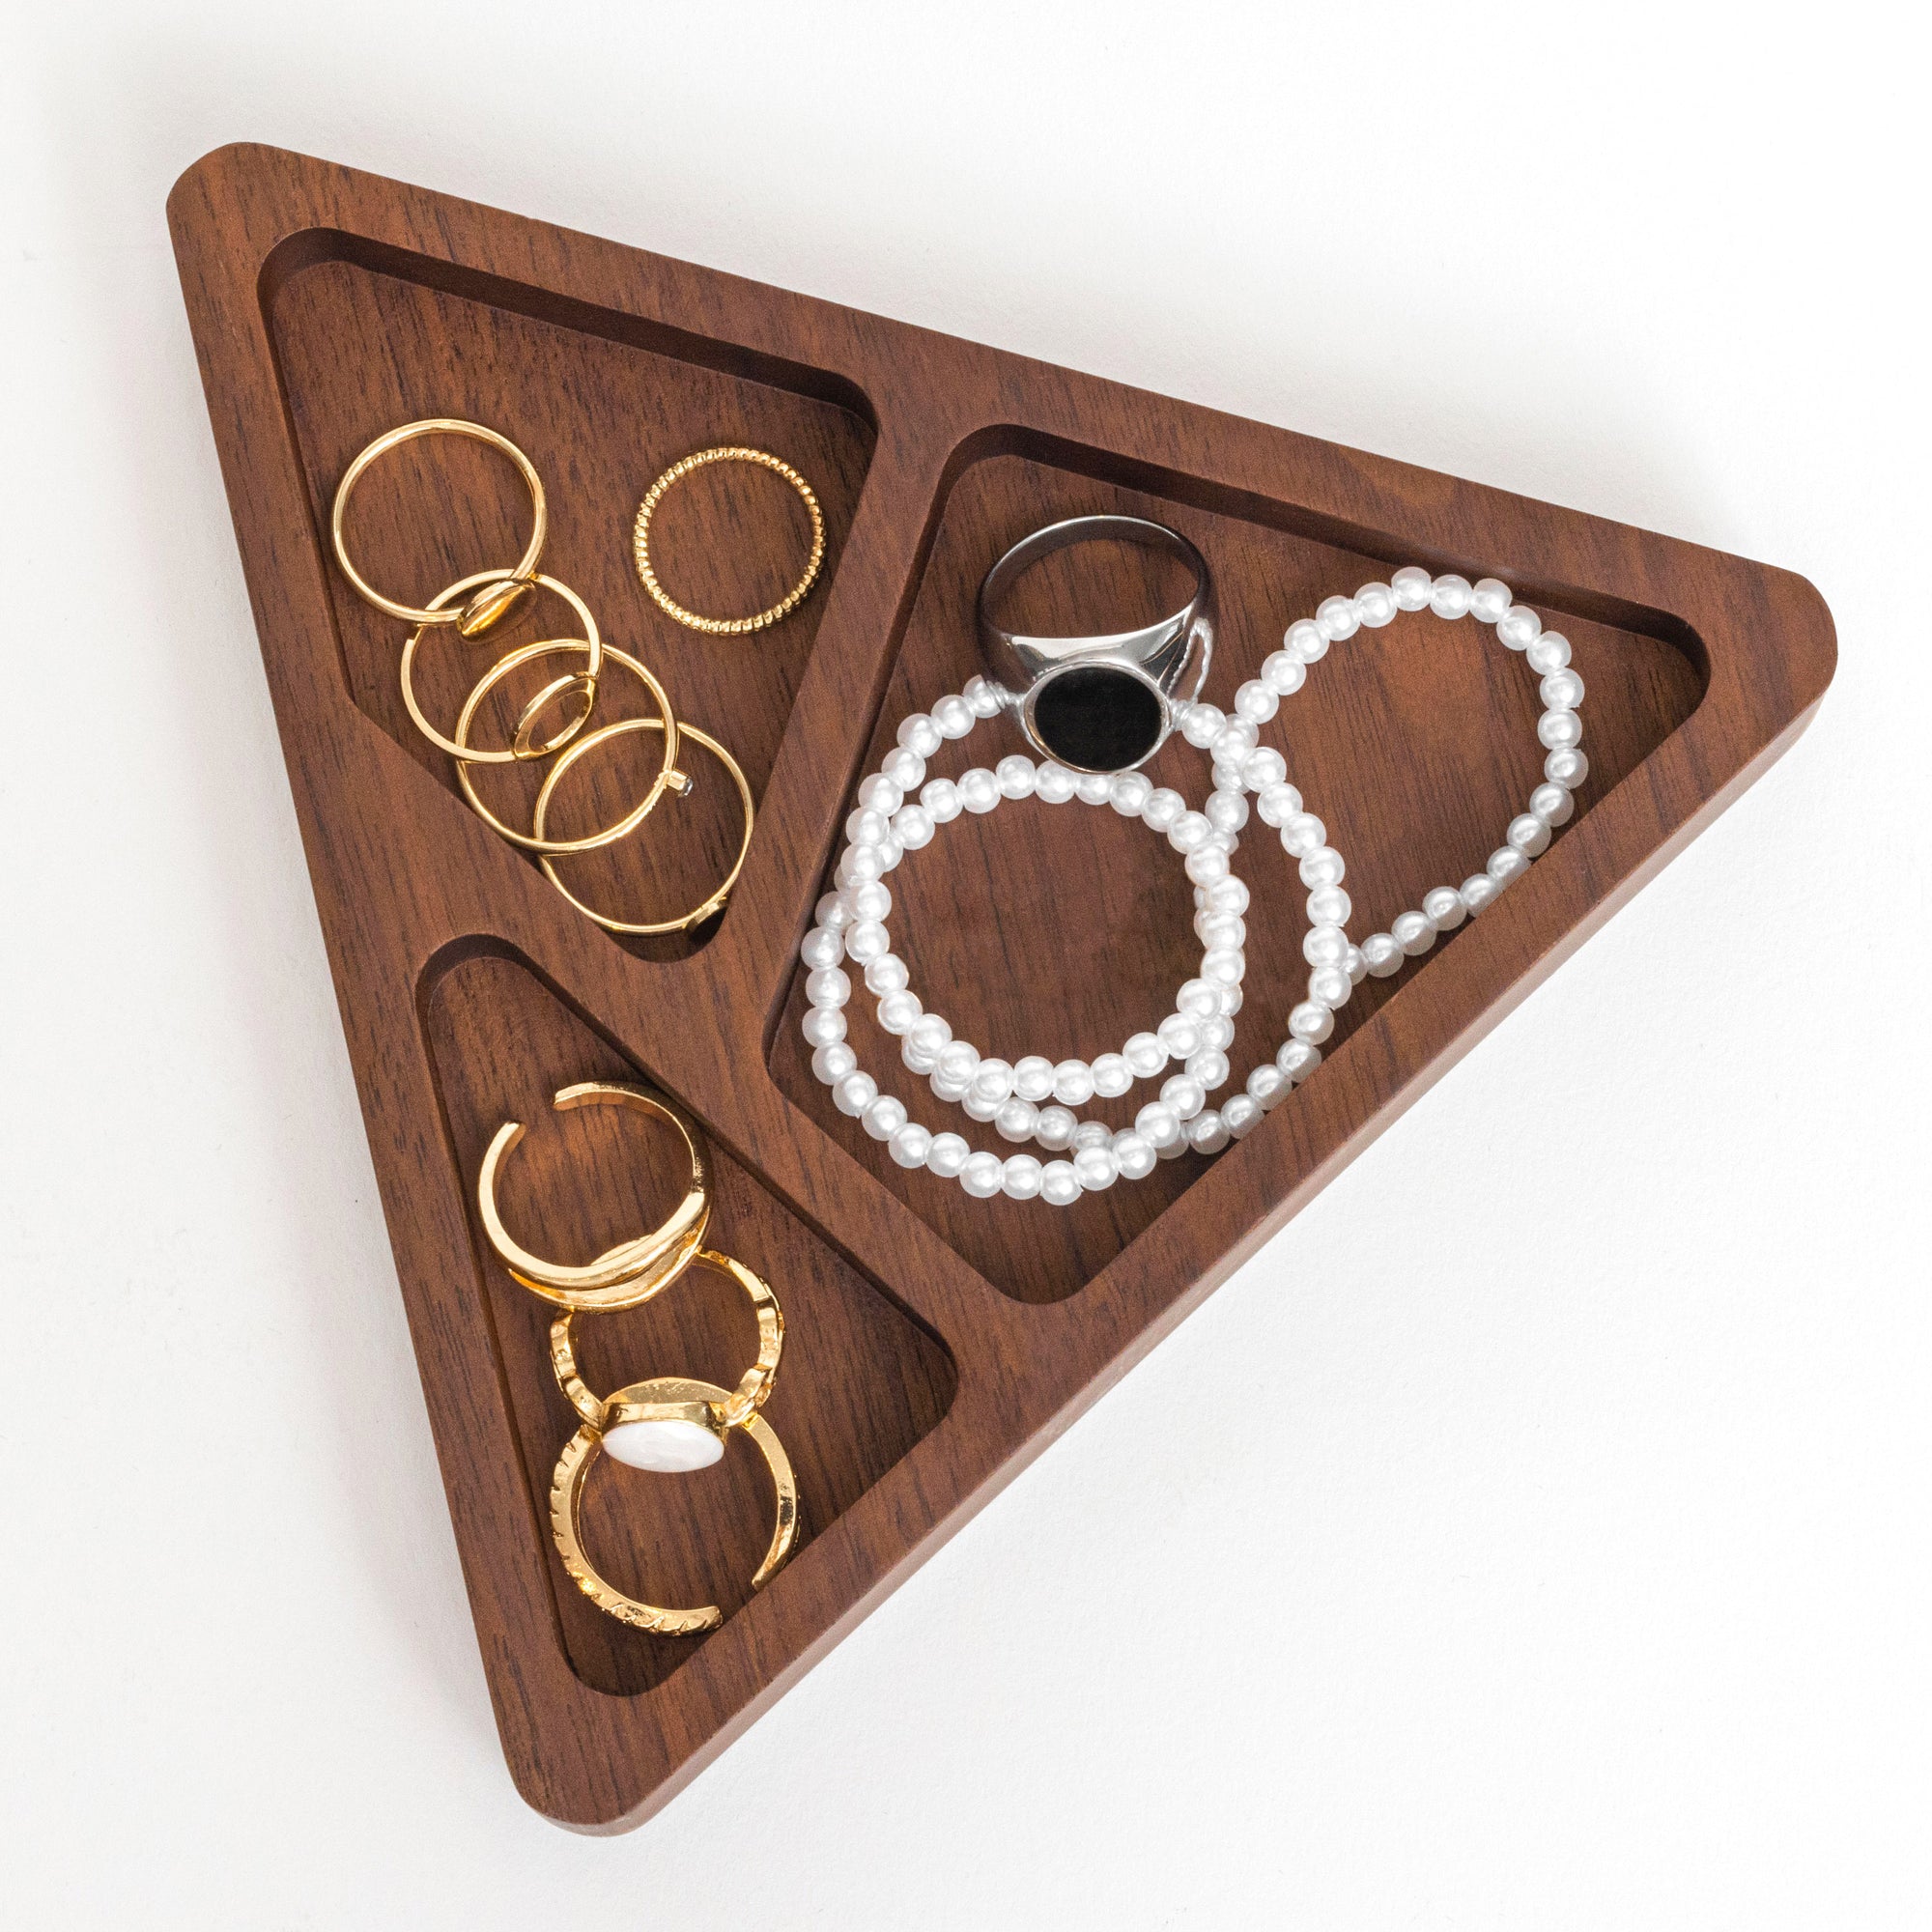 Prazoli Triangle Wood Ring Holder Dish for Jewelry Organizer Tray for Women Engagement Necklace and Earring - Cute Unique Aesthetic